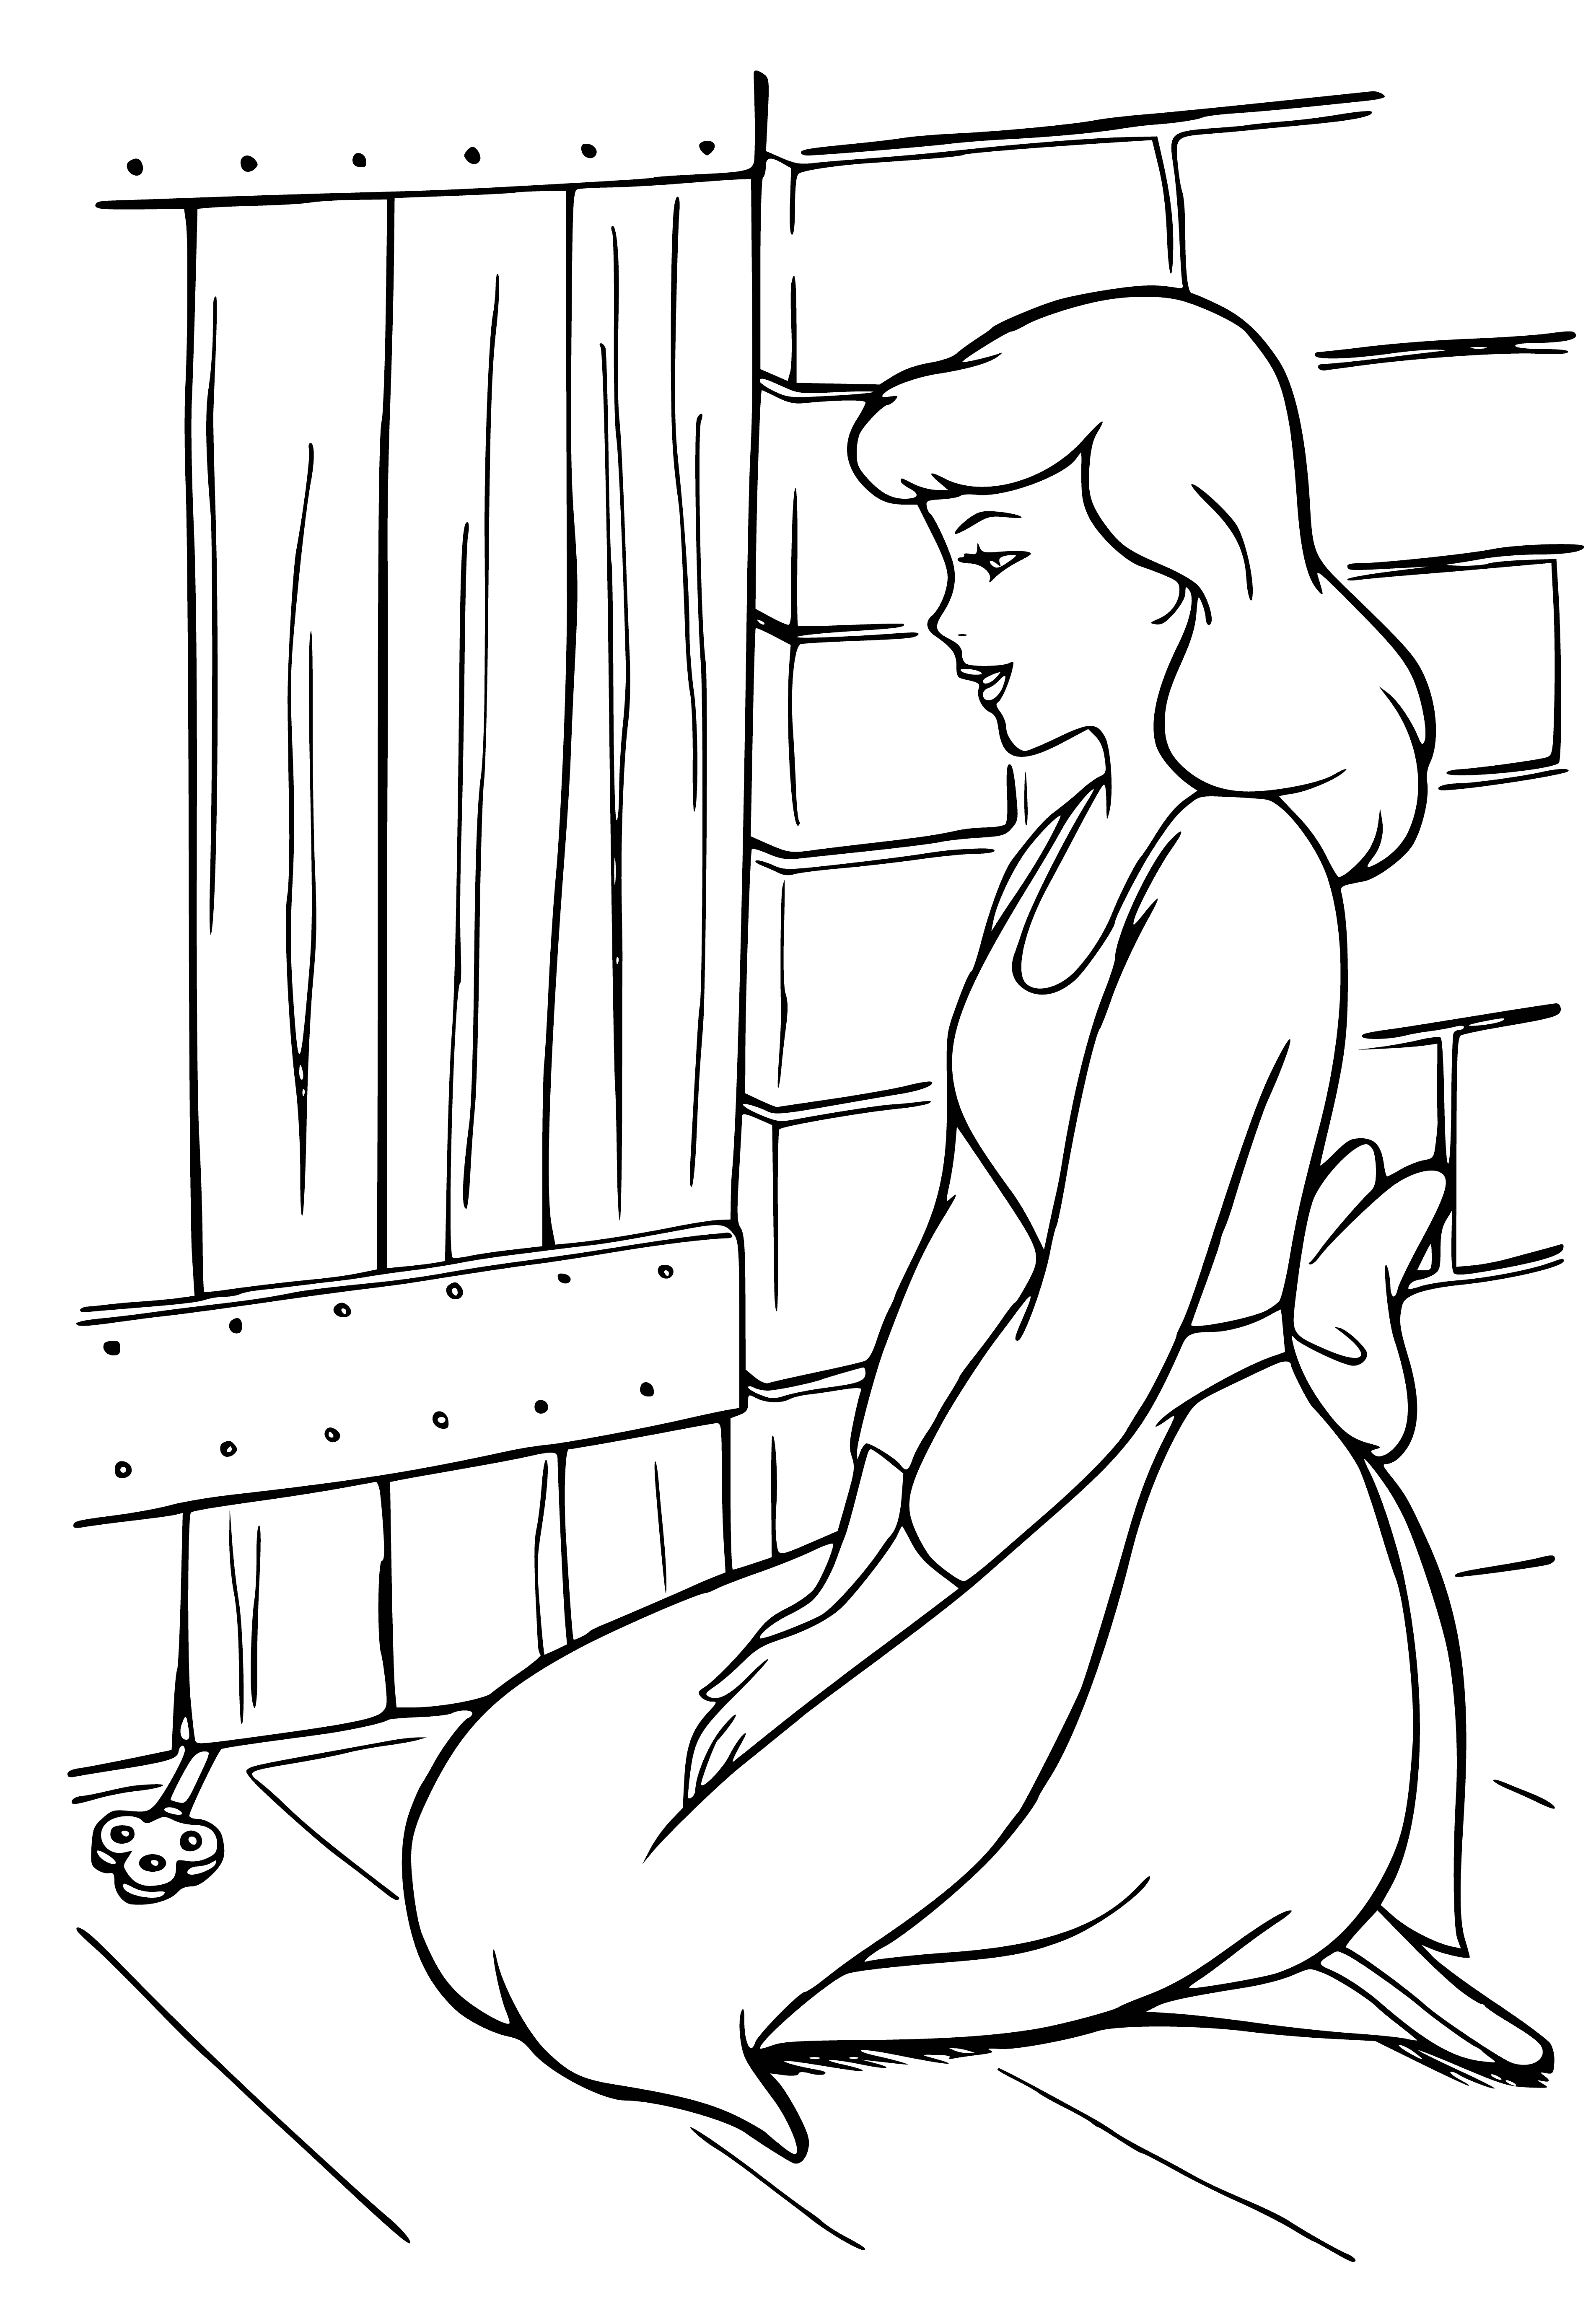 coloring page: Two women, one standing and one holding a key under the door. #coloringpage #womensneekpeek